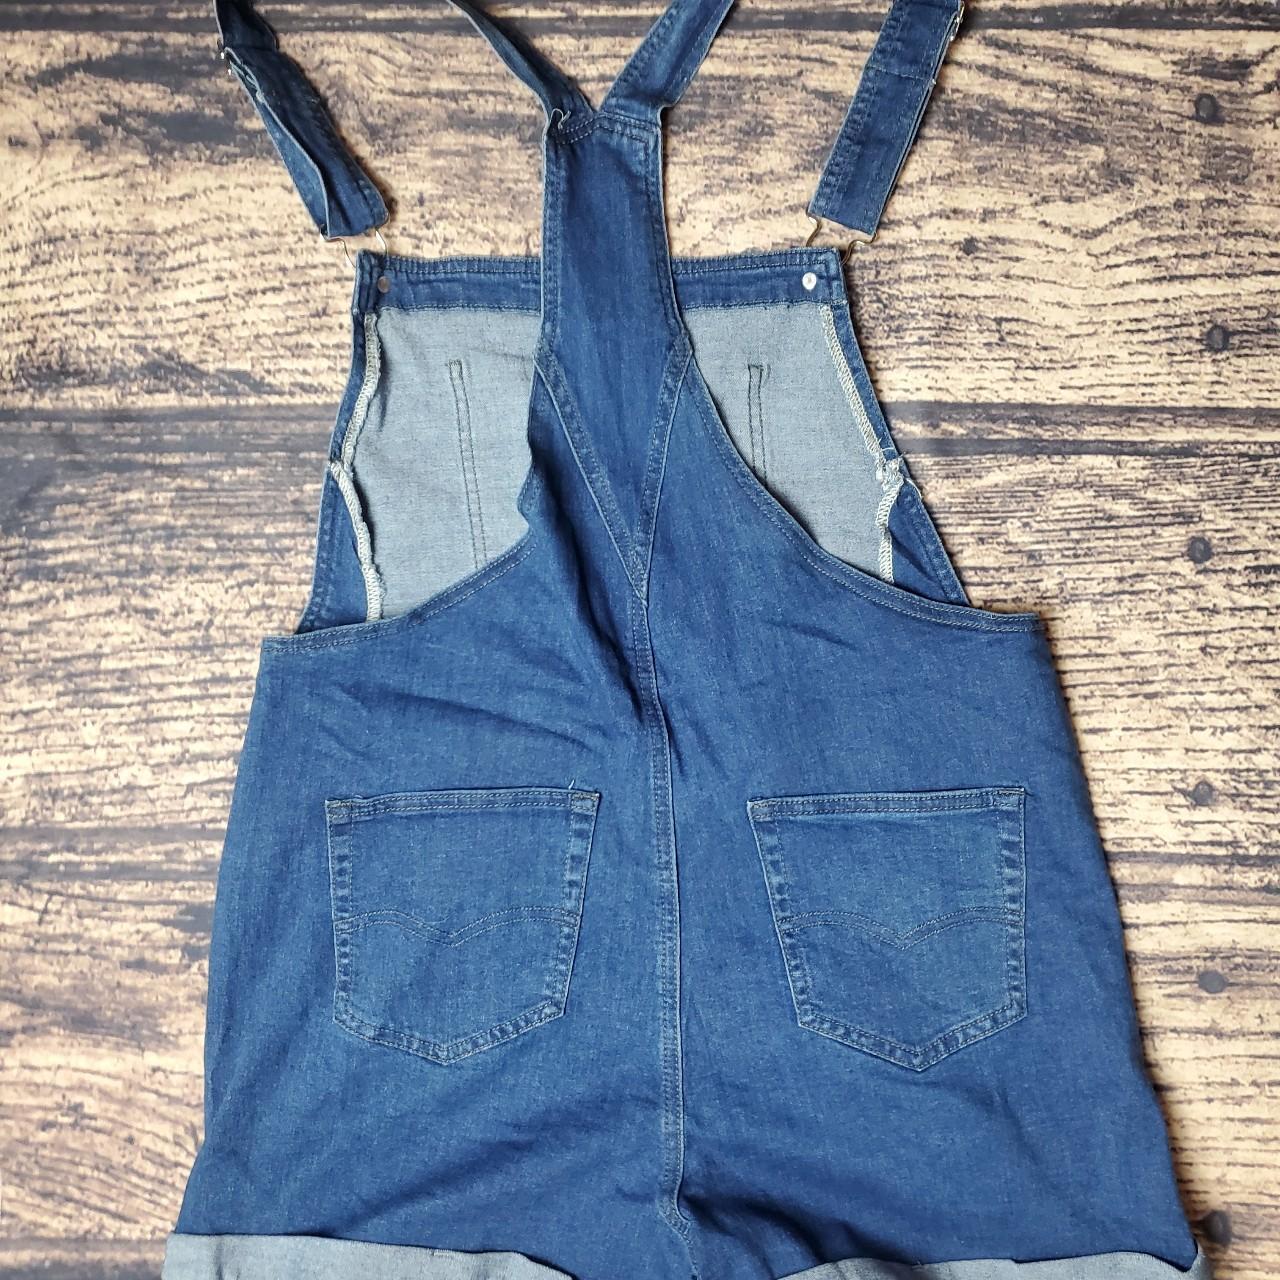 Product Image 3 - Denim Overall Shorts.
Size Large
The measurements